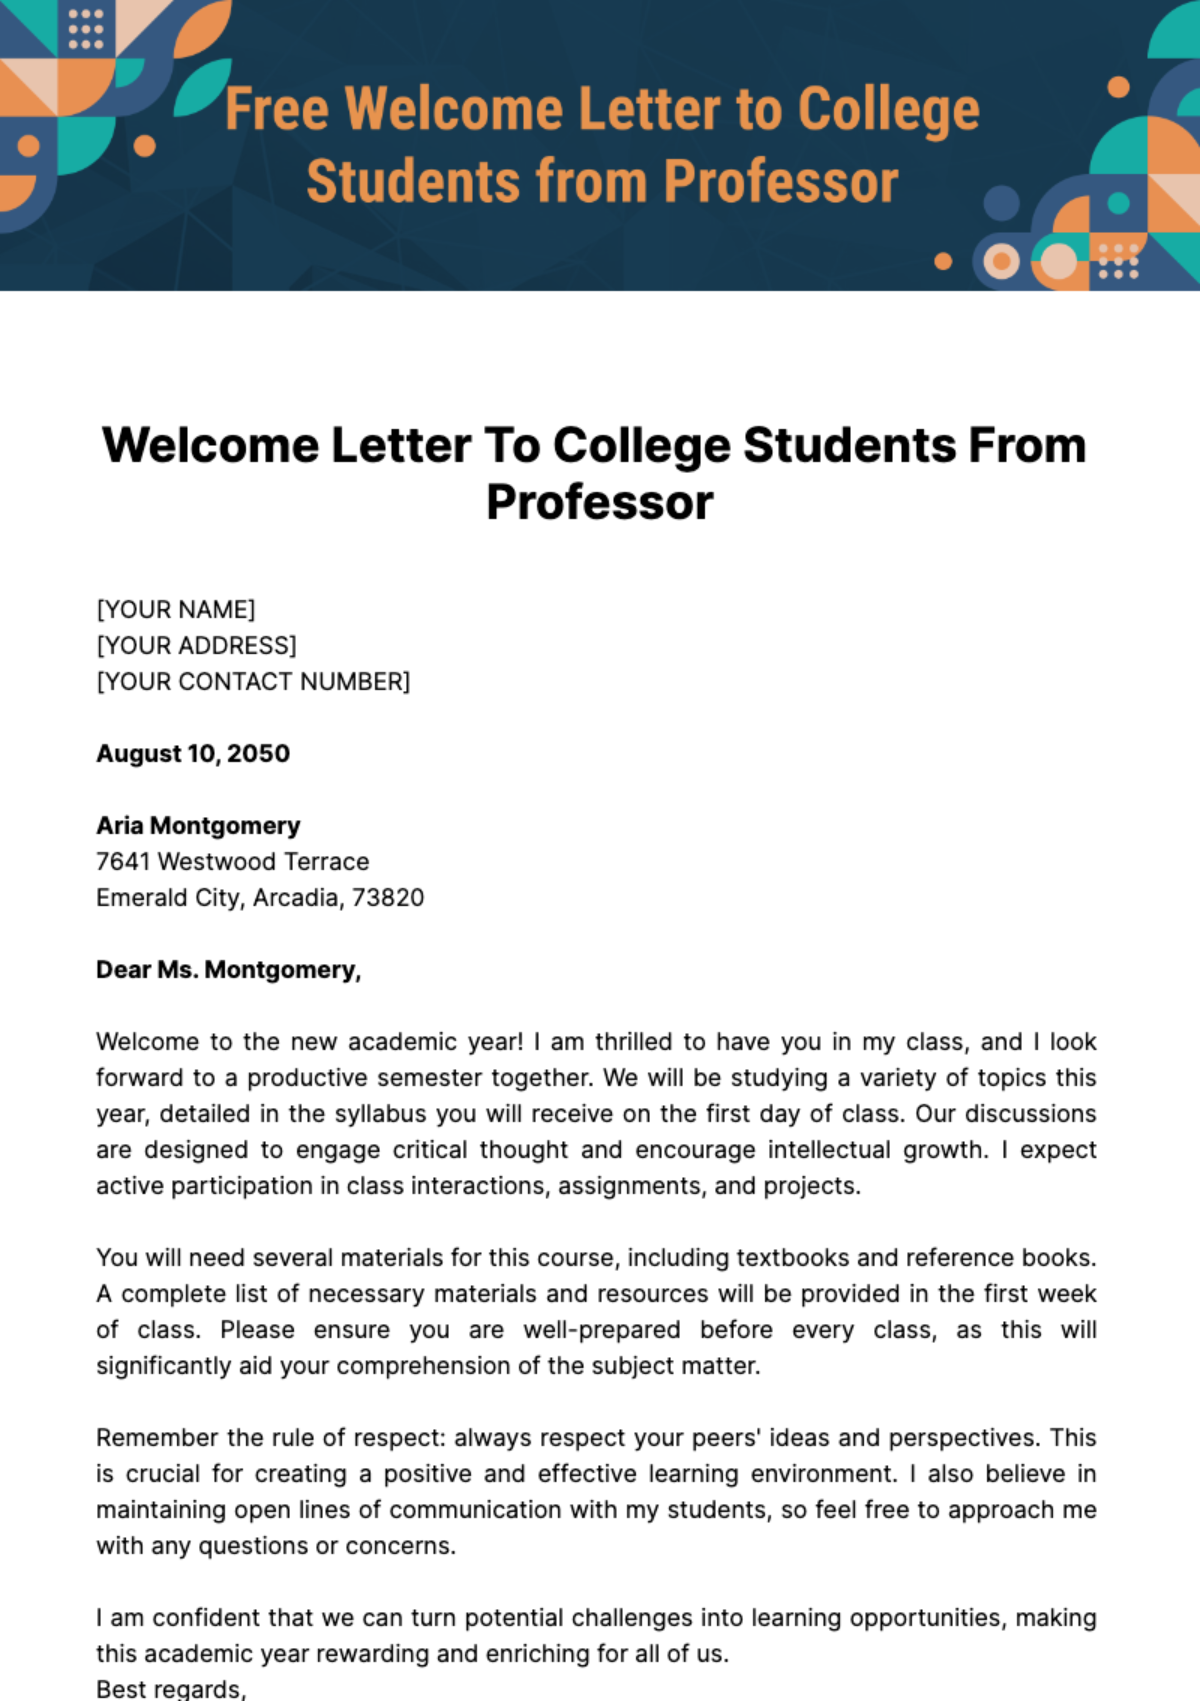 Free Welcome Letter to College Students from Professor Template